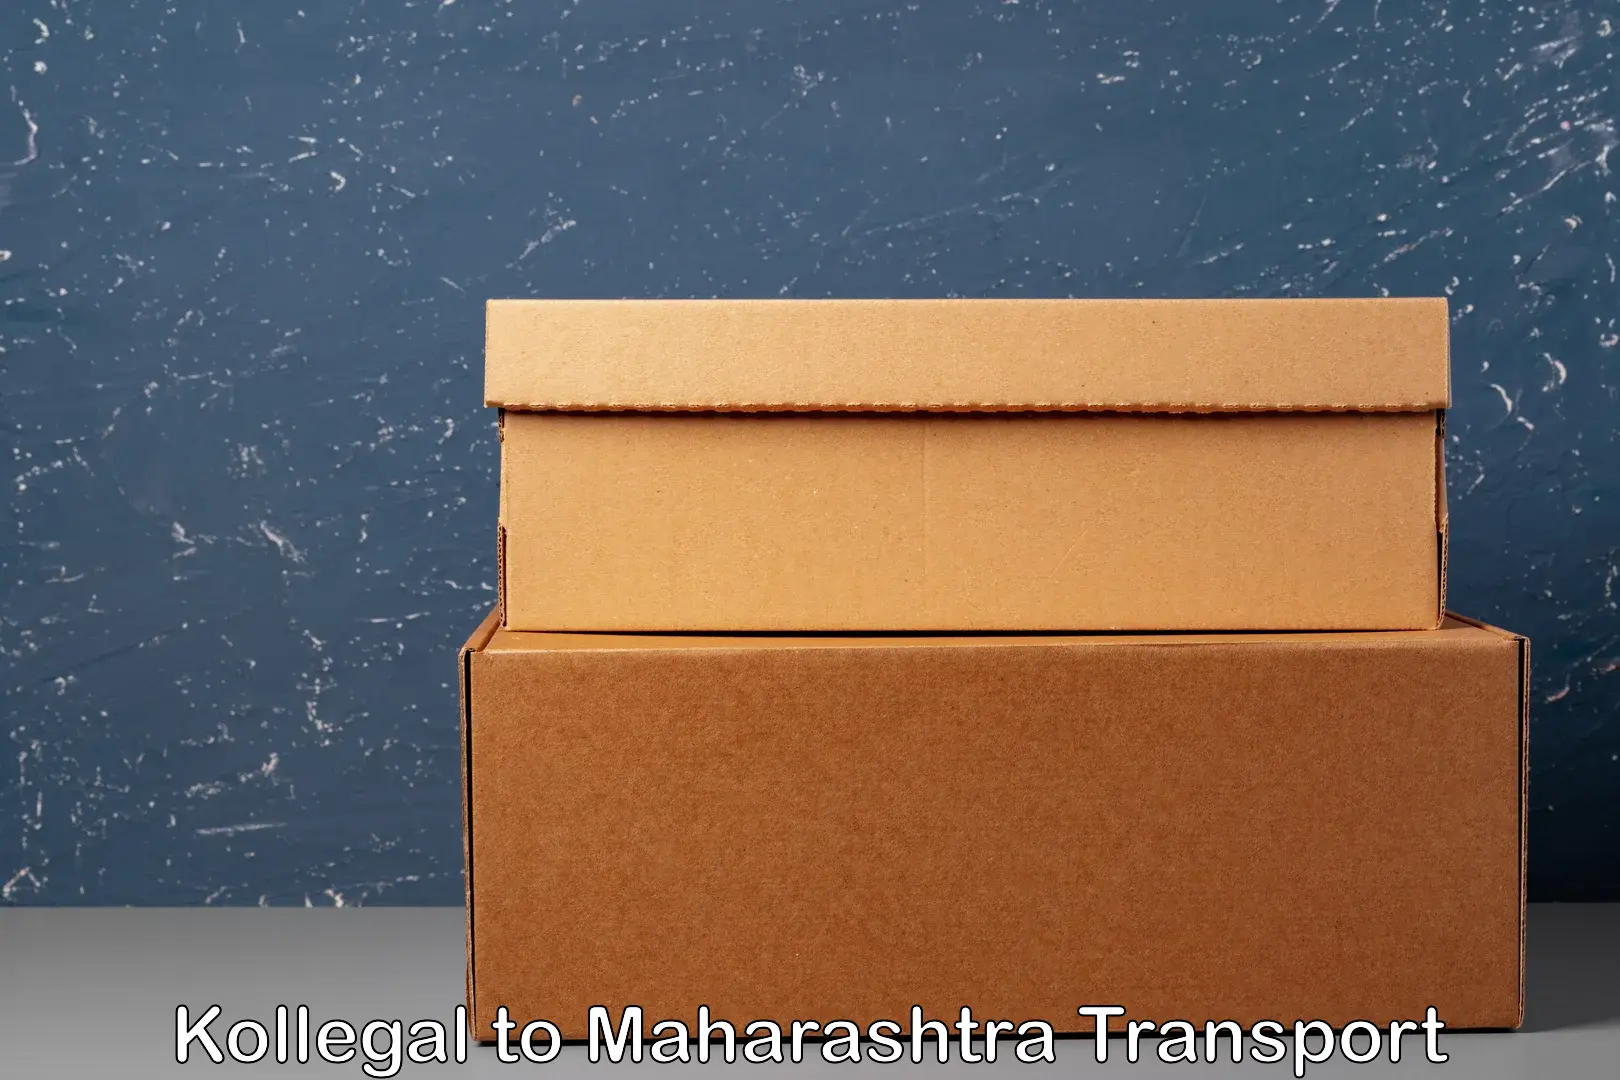 Goods delivery service Kollegal to Maharashtra